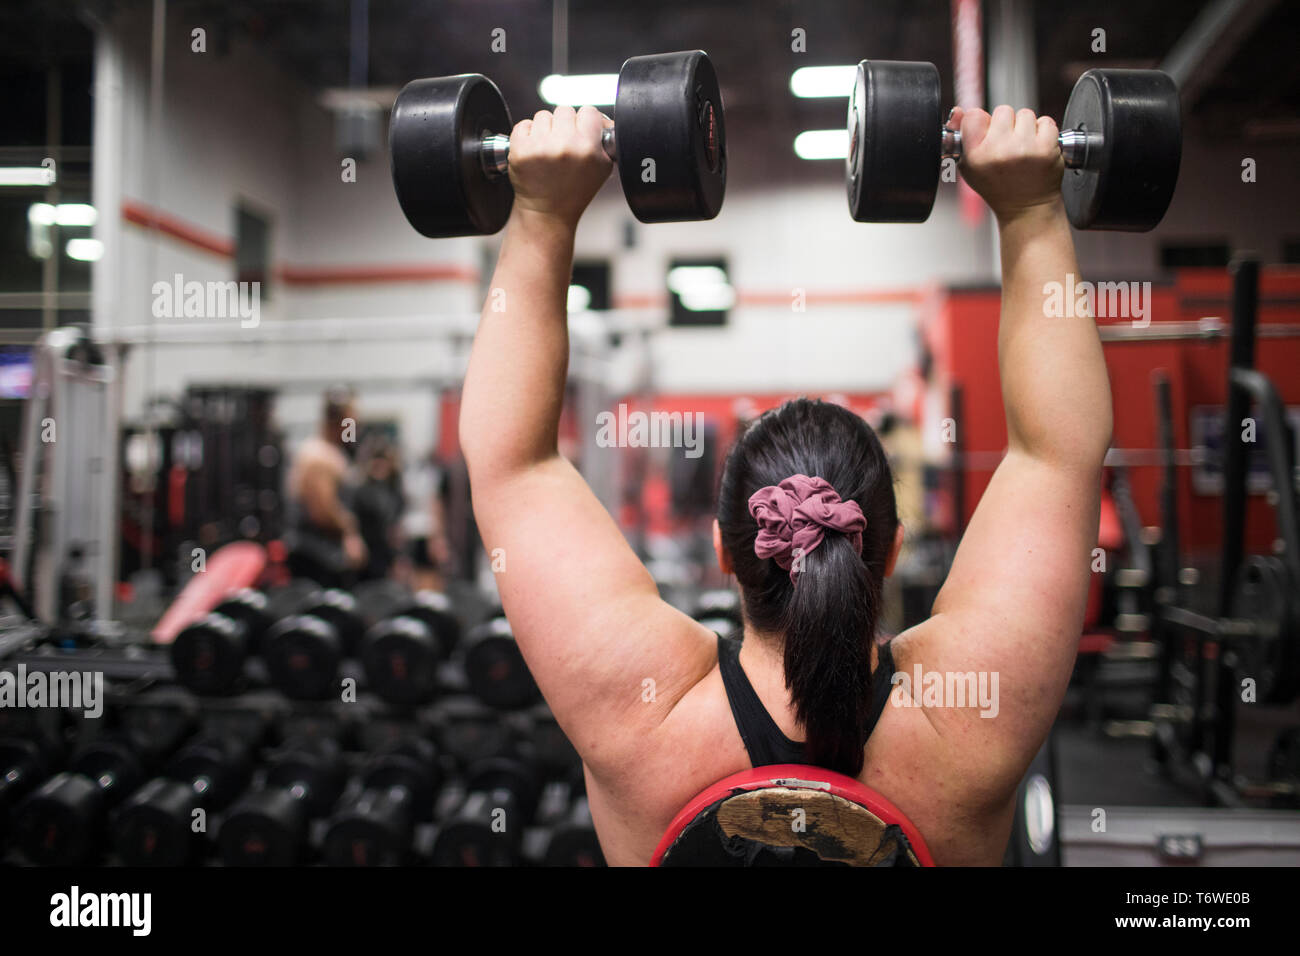 Strong young woman doing shoulder press with dumbell Stock Photo - Alamy